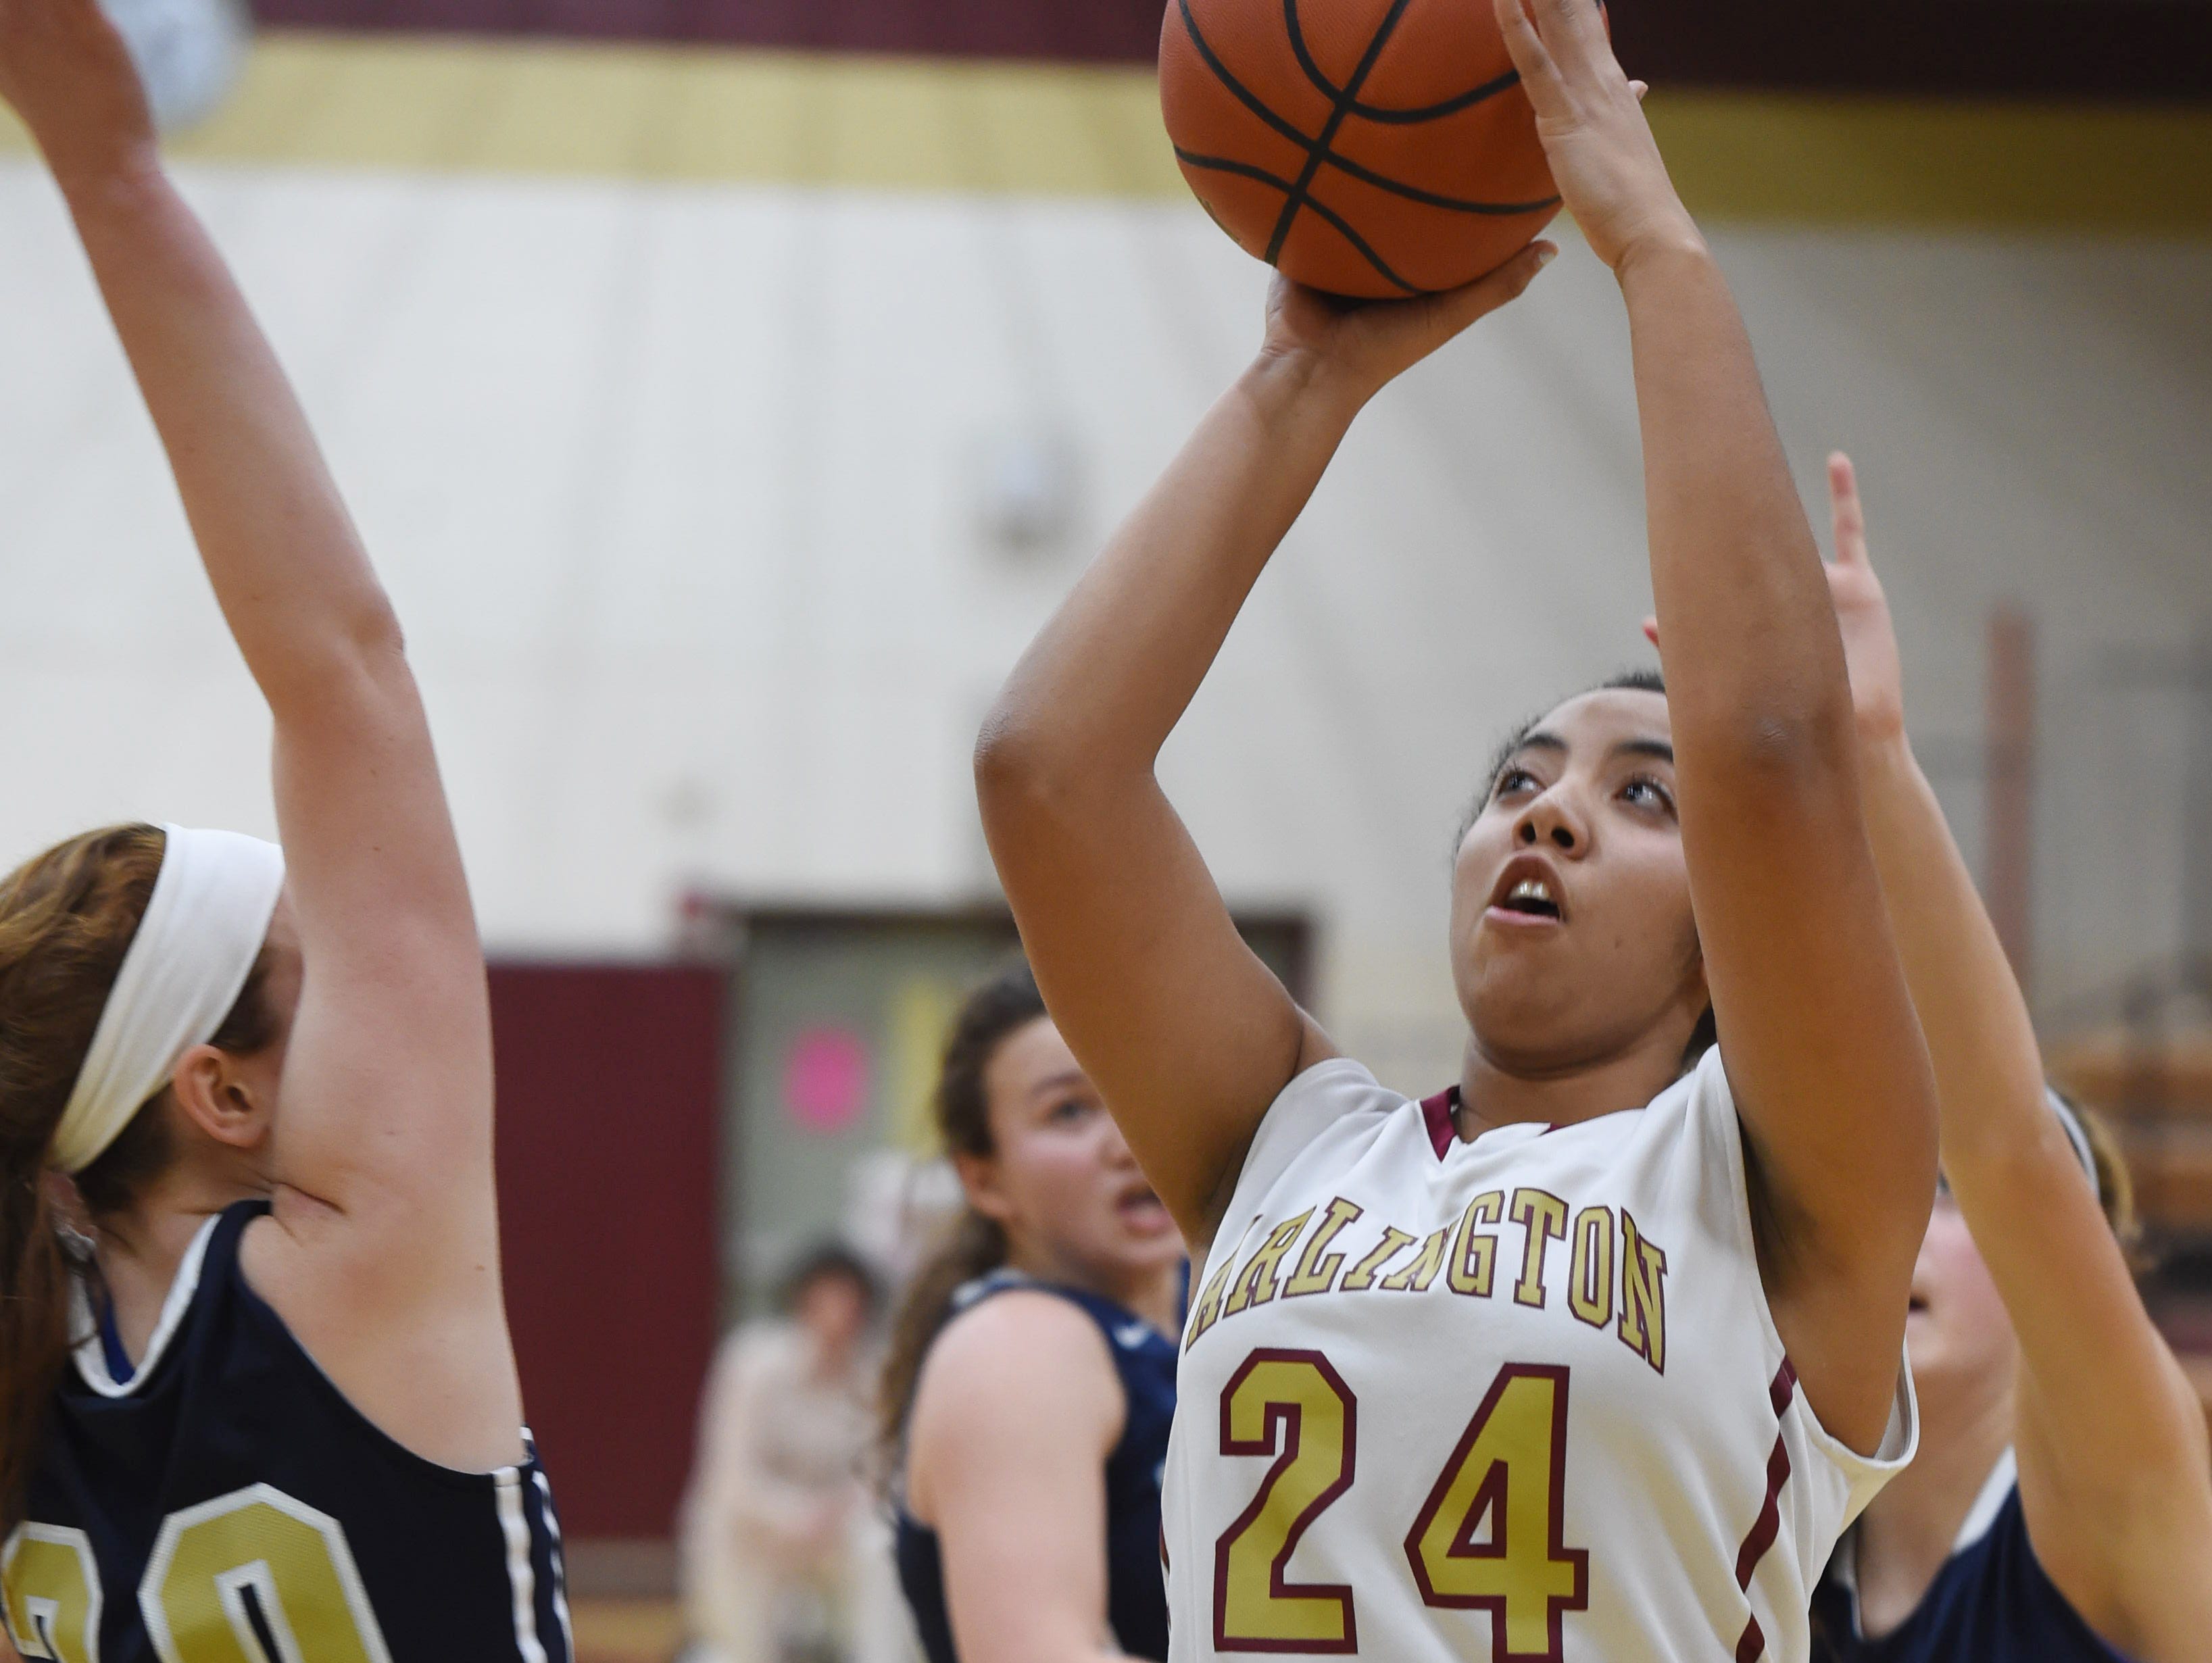 Arlington's Tiana Johnson takes a shot as Lourdes' Marguerite McGahay covers her during Wednesday's game at Arlington.